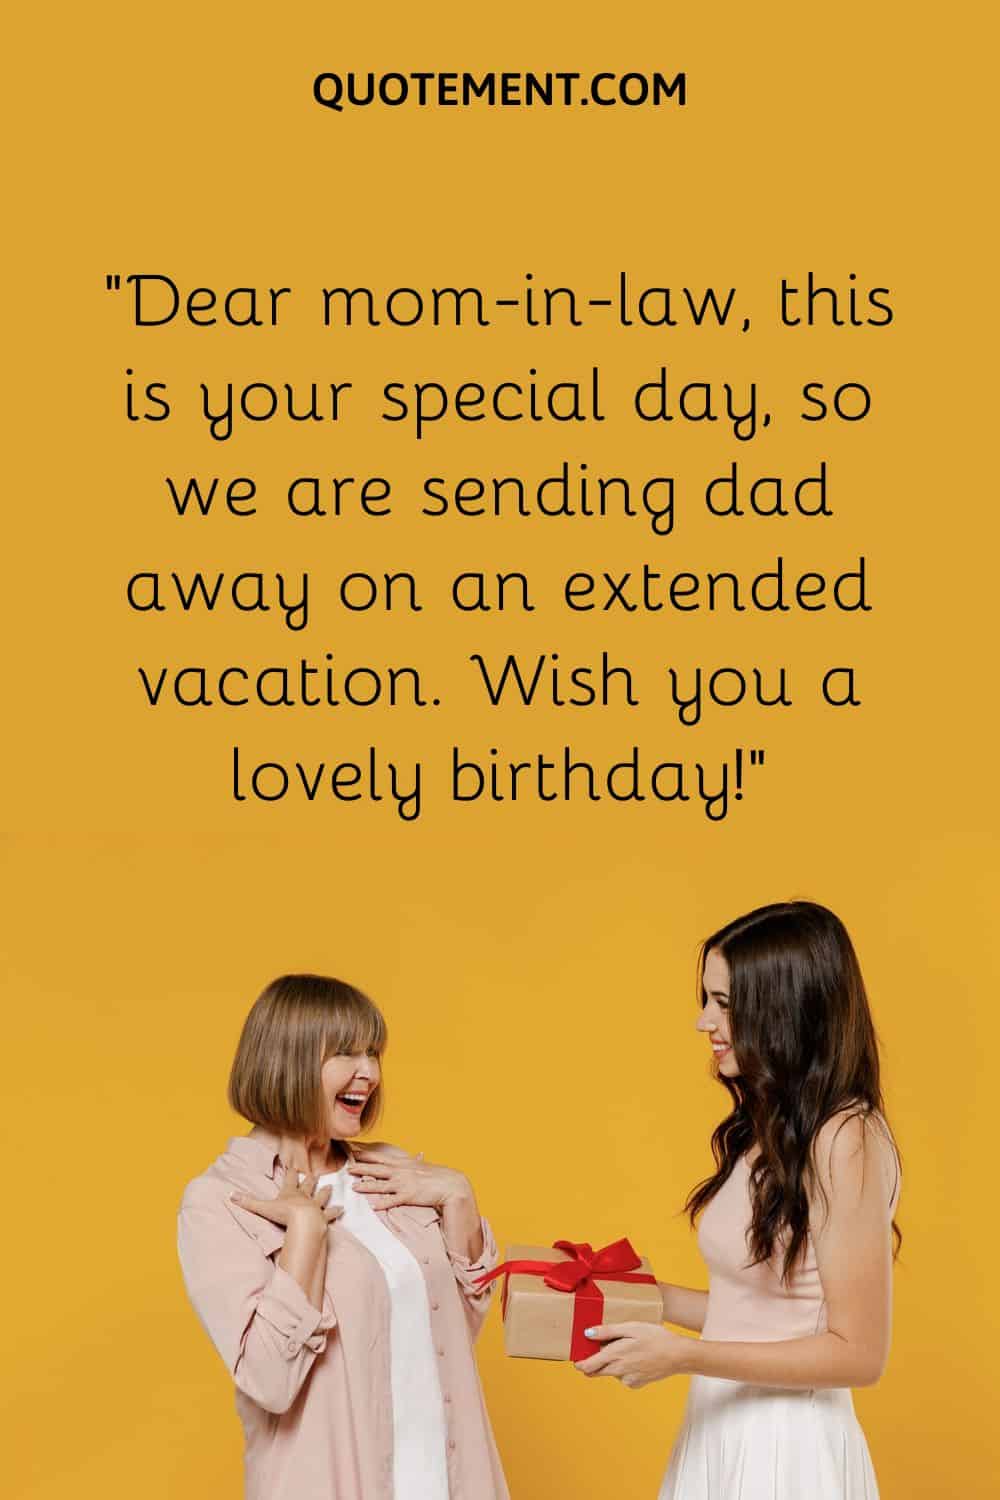 Dear mom-in-law, this is your special day, so we are sending dad away on an extended vacation